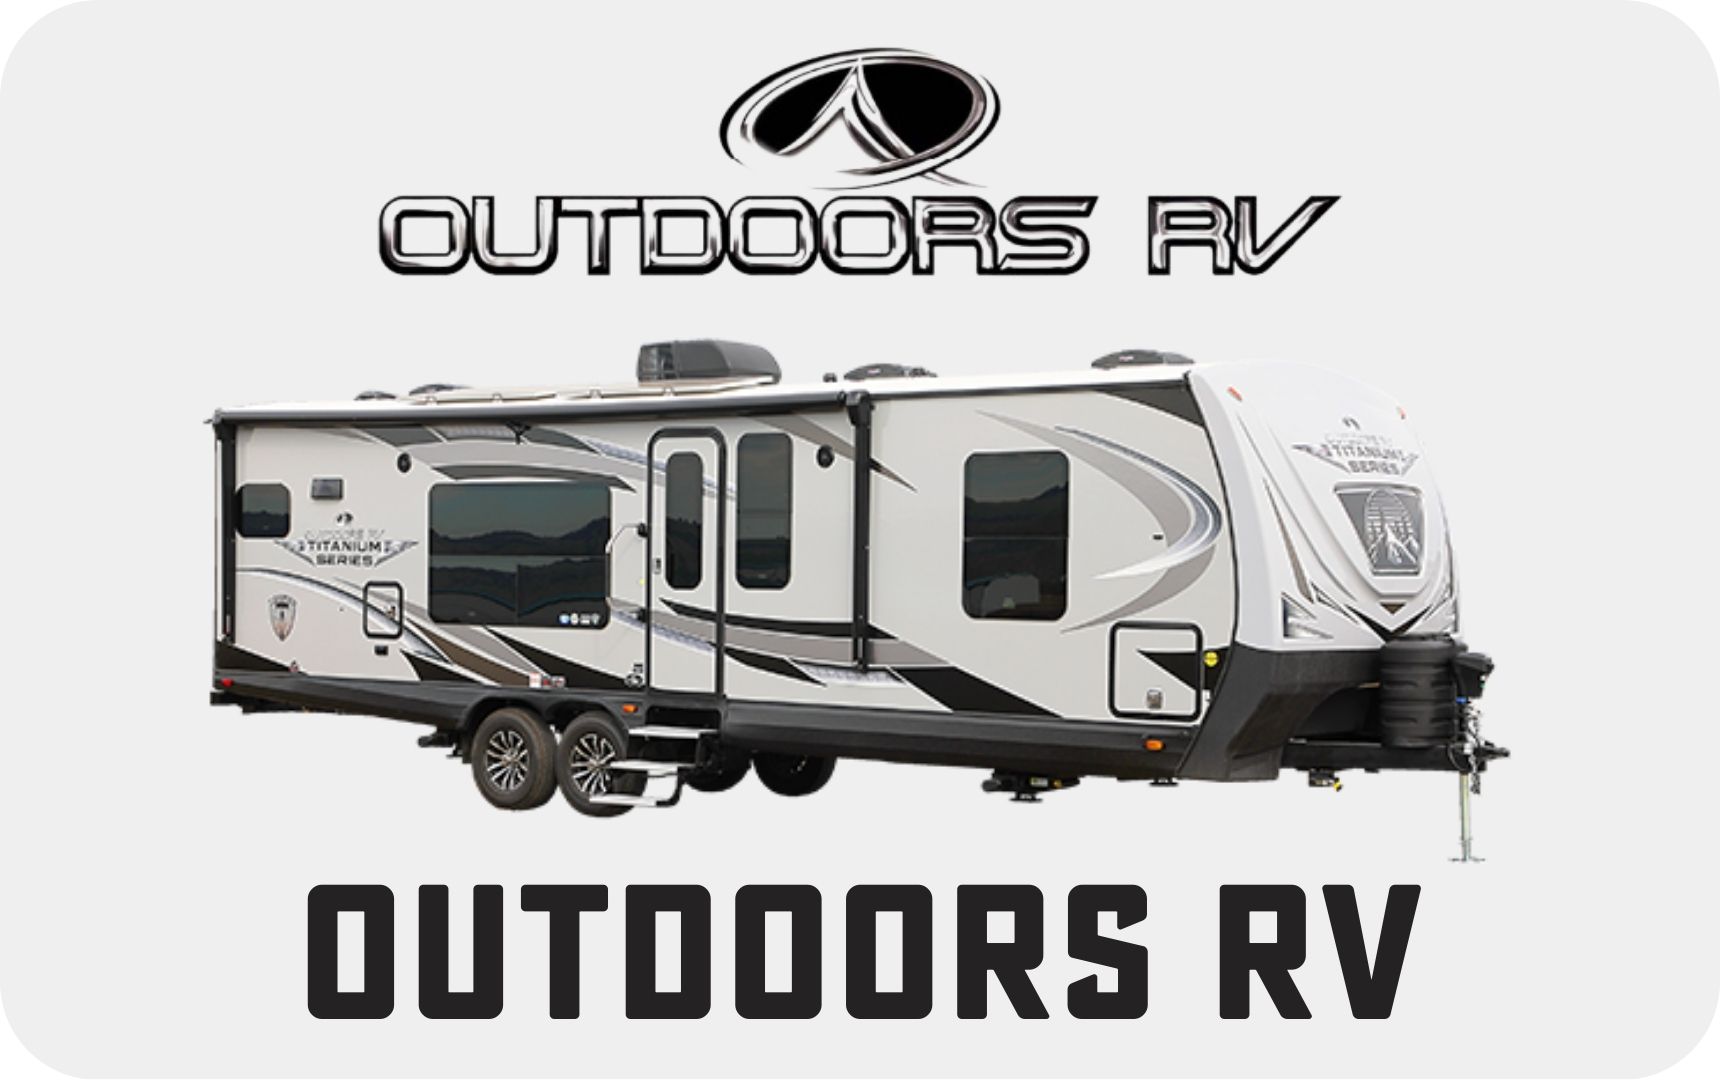 Outdoors RV Travel Trailers